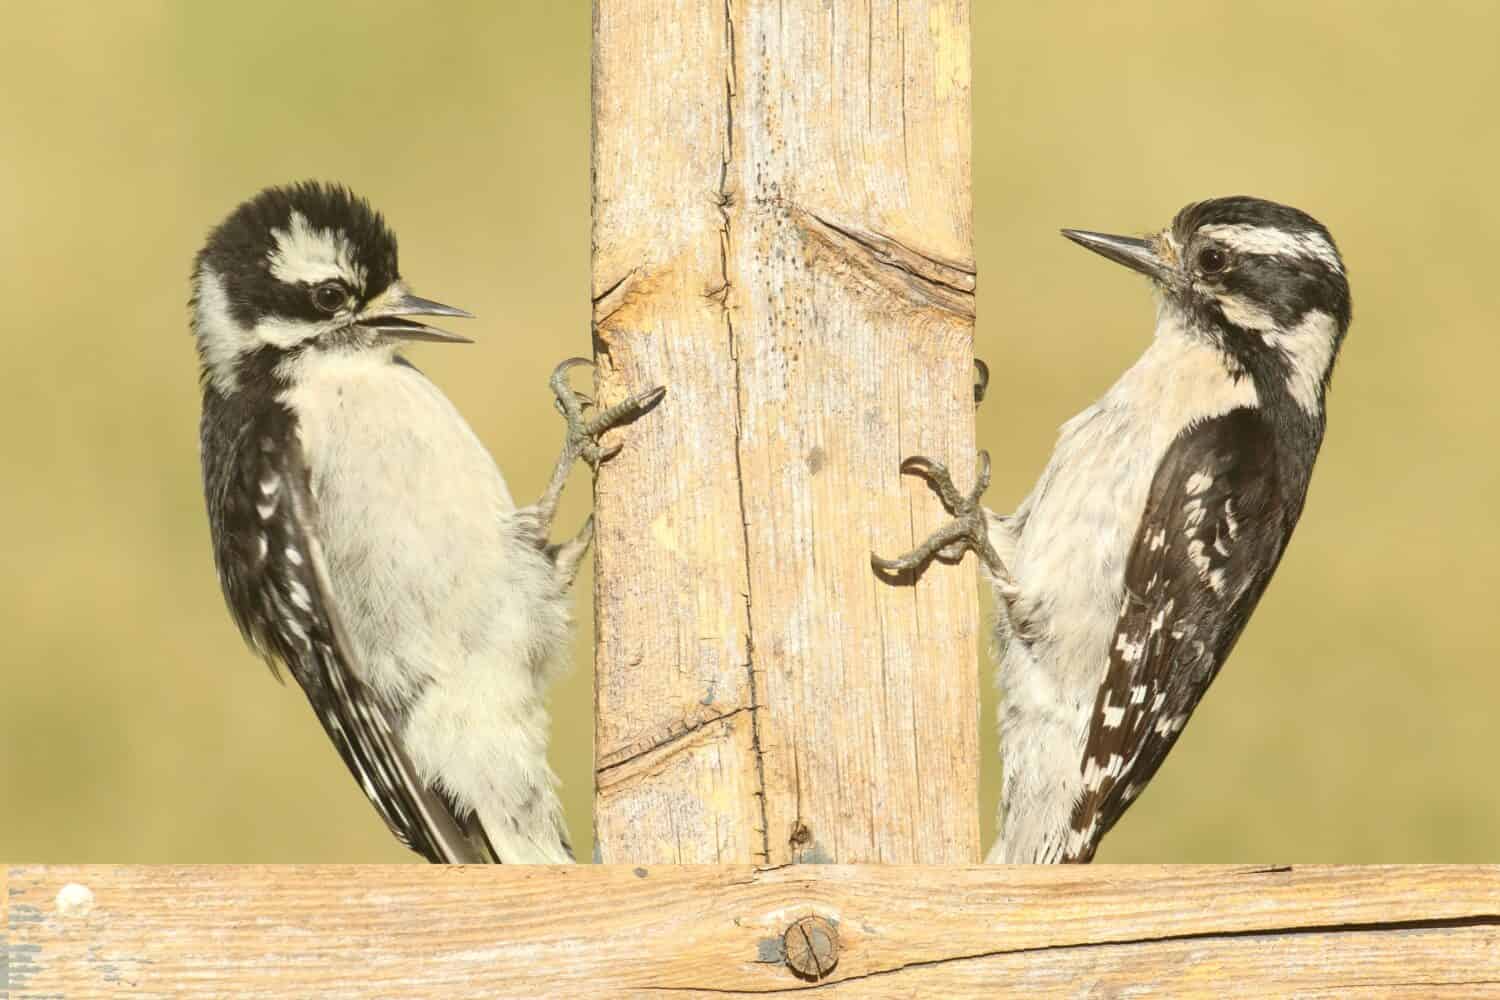 Female Downy Woodpecker (Picoides pubescens) on a fence with her baby